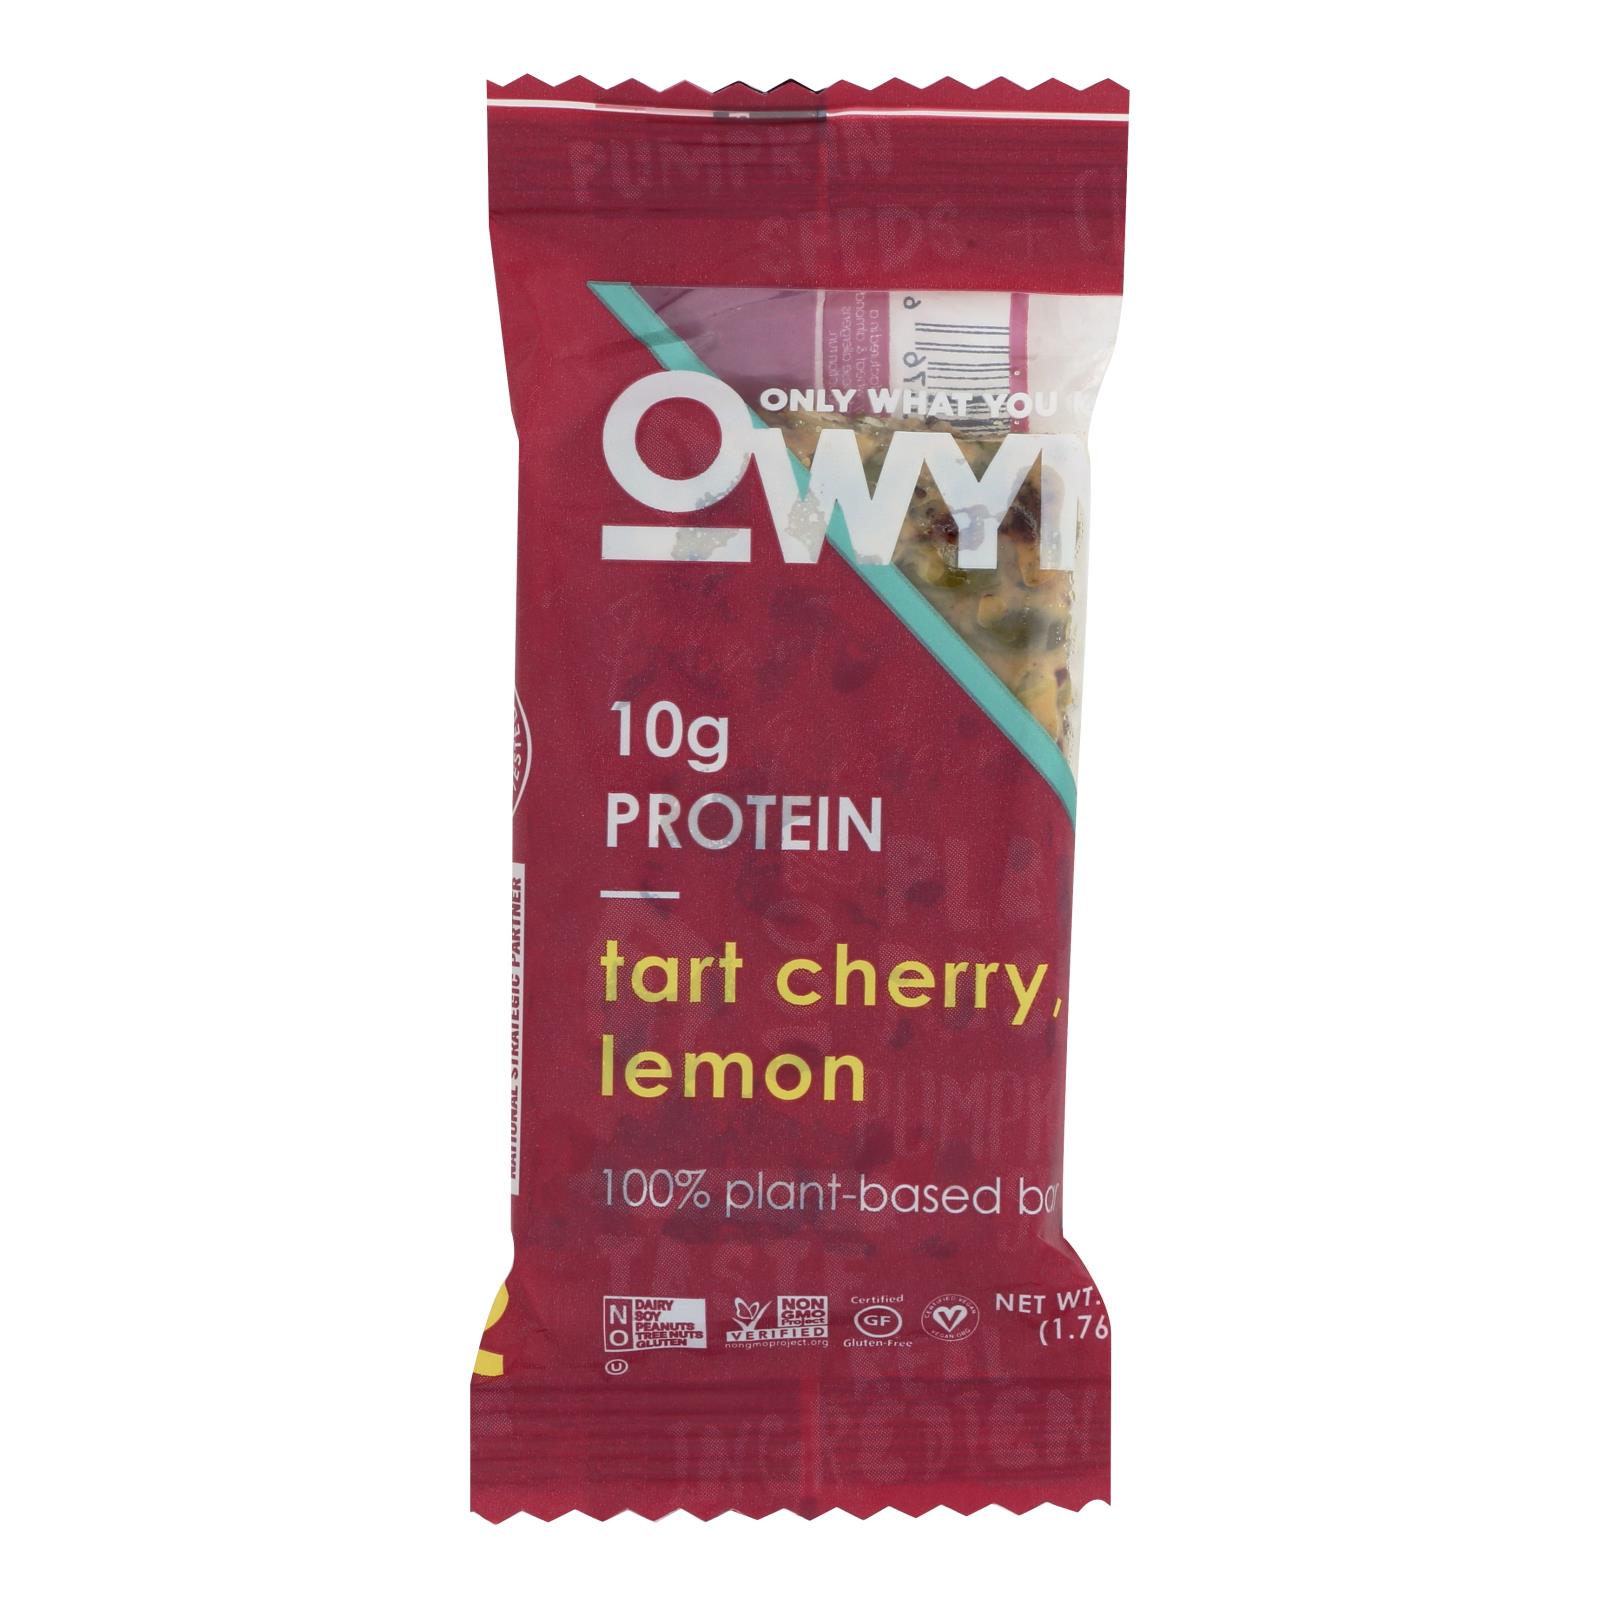 Only What You Need - Bar Tart Chry&lmn - Case of 12 - 1.76 OZ